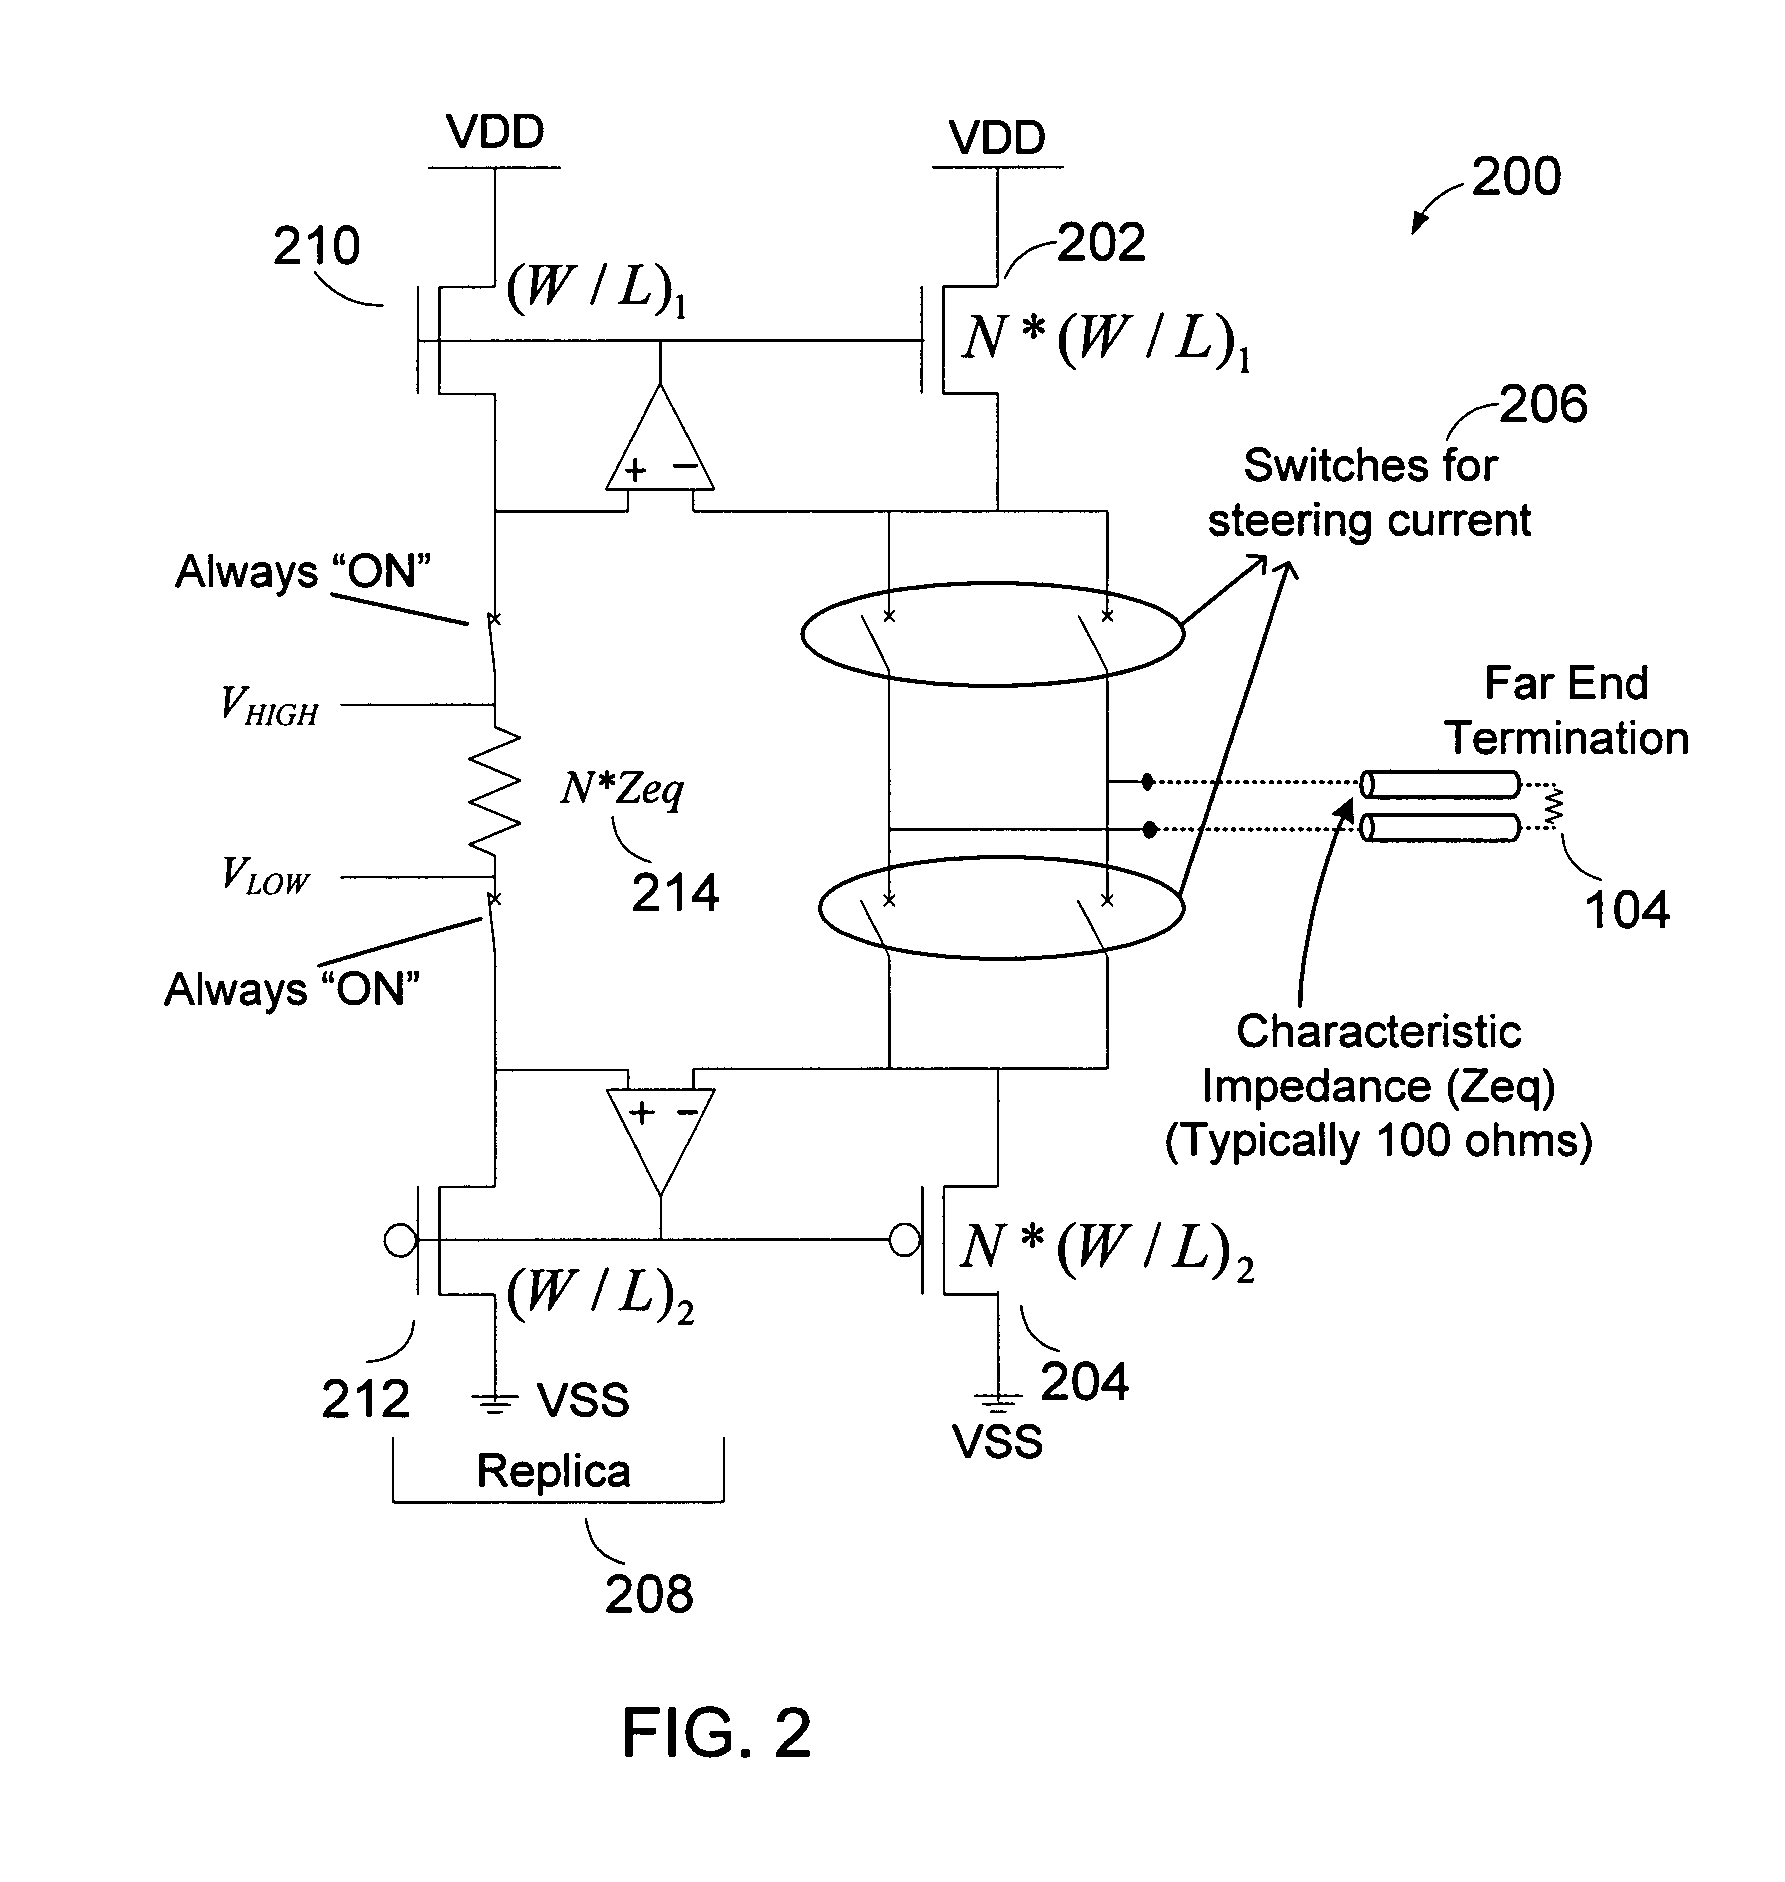 Hot-pluggable differential signaling driver